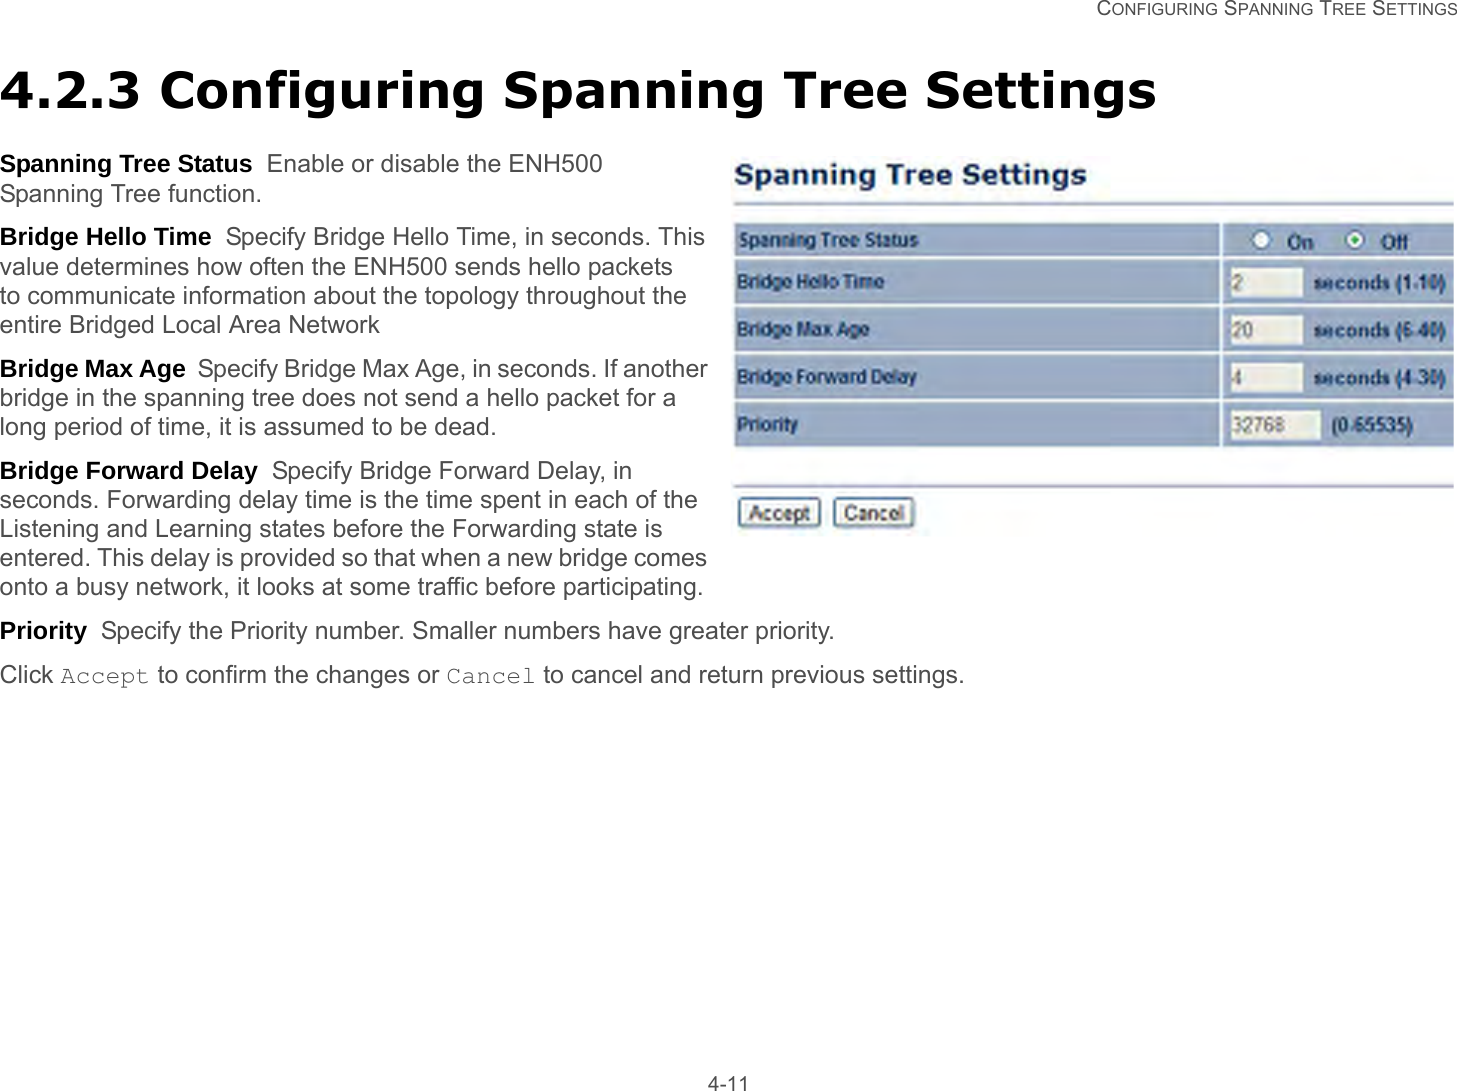   CONFIGURING SPANNING TREE SETTINGS 4-114.2.3 Configuring Spanning Tree SettingsSpanning Tree Status  Enable or disable the ENH500 Spanning Tree function.Bridge Hello Time  Specify Bridge Hello Time, in seconds. This value determines how often the ENH500 sends hello packets to communicate information about the topology throughout the entire Bridged Local Area NetworkBridge Max Age  Specify Bridge Max Age, in seconds. If another bridge in the spanning tree does not send a hello packet for a long period of time, it is assumed to be dead.Bridge Forward Delay  Specify Bridge Forward Delay, in seconds. Forwarding delay time is the time spent in each of the Listening and Learning states before the Forwarding state is entered. This delay is provided so that when a new bridge comes onto a busy network, it looks at some traffic before participating.Priority  Specify the Priority number. Smaller numbers have greater priority.Click Accept to confirm the changes or Cancel to cancel and return previous settings.